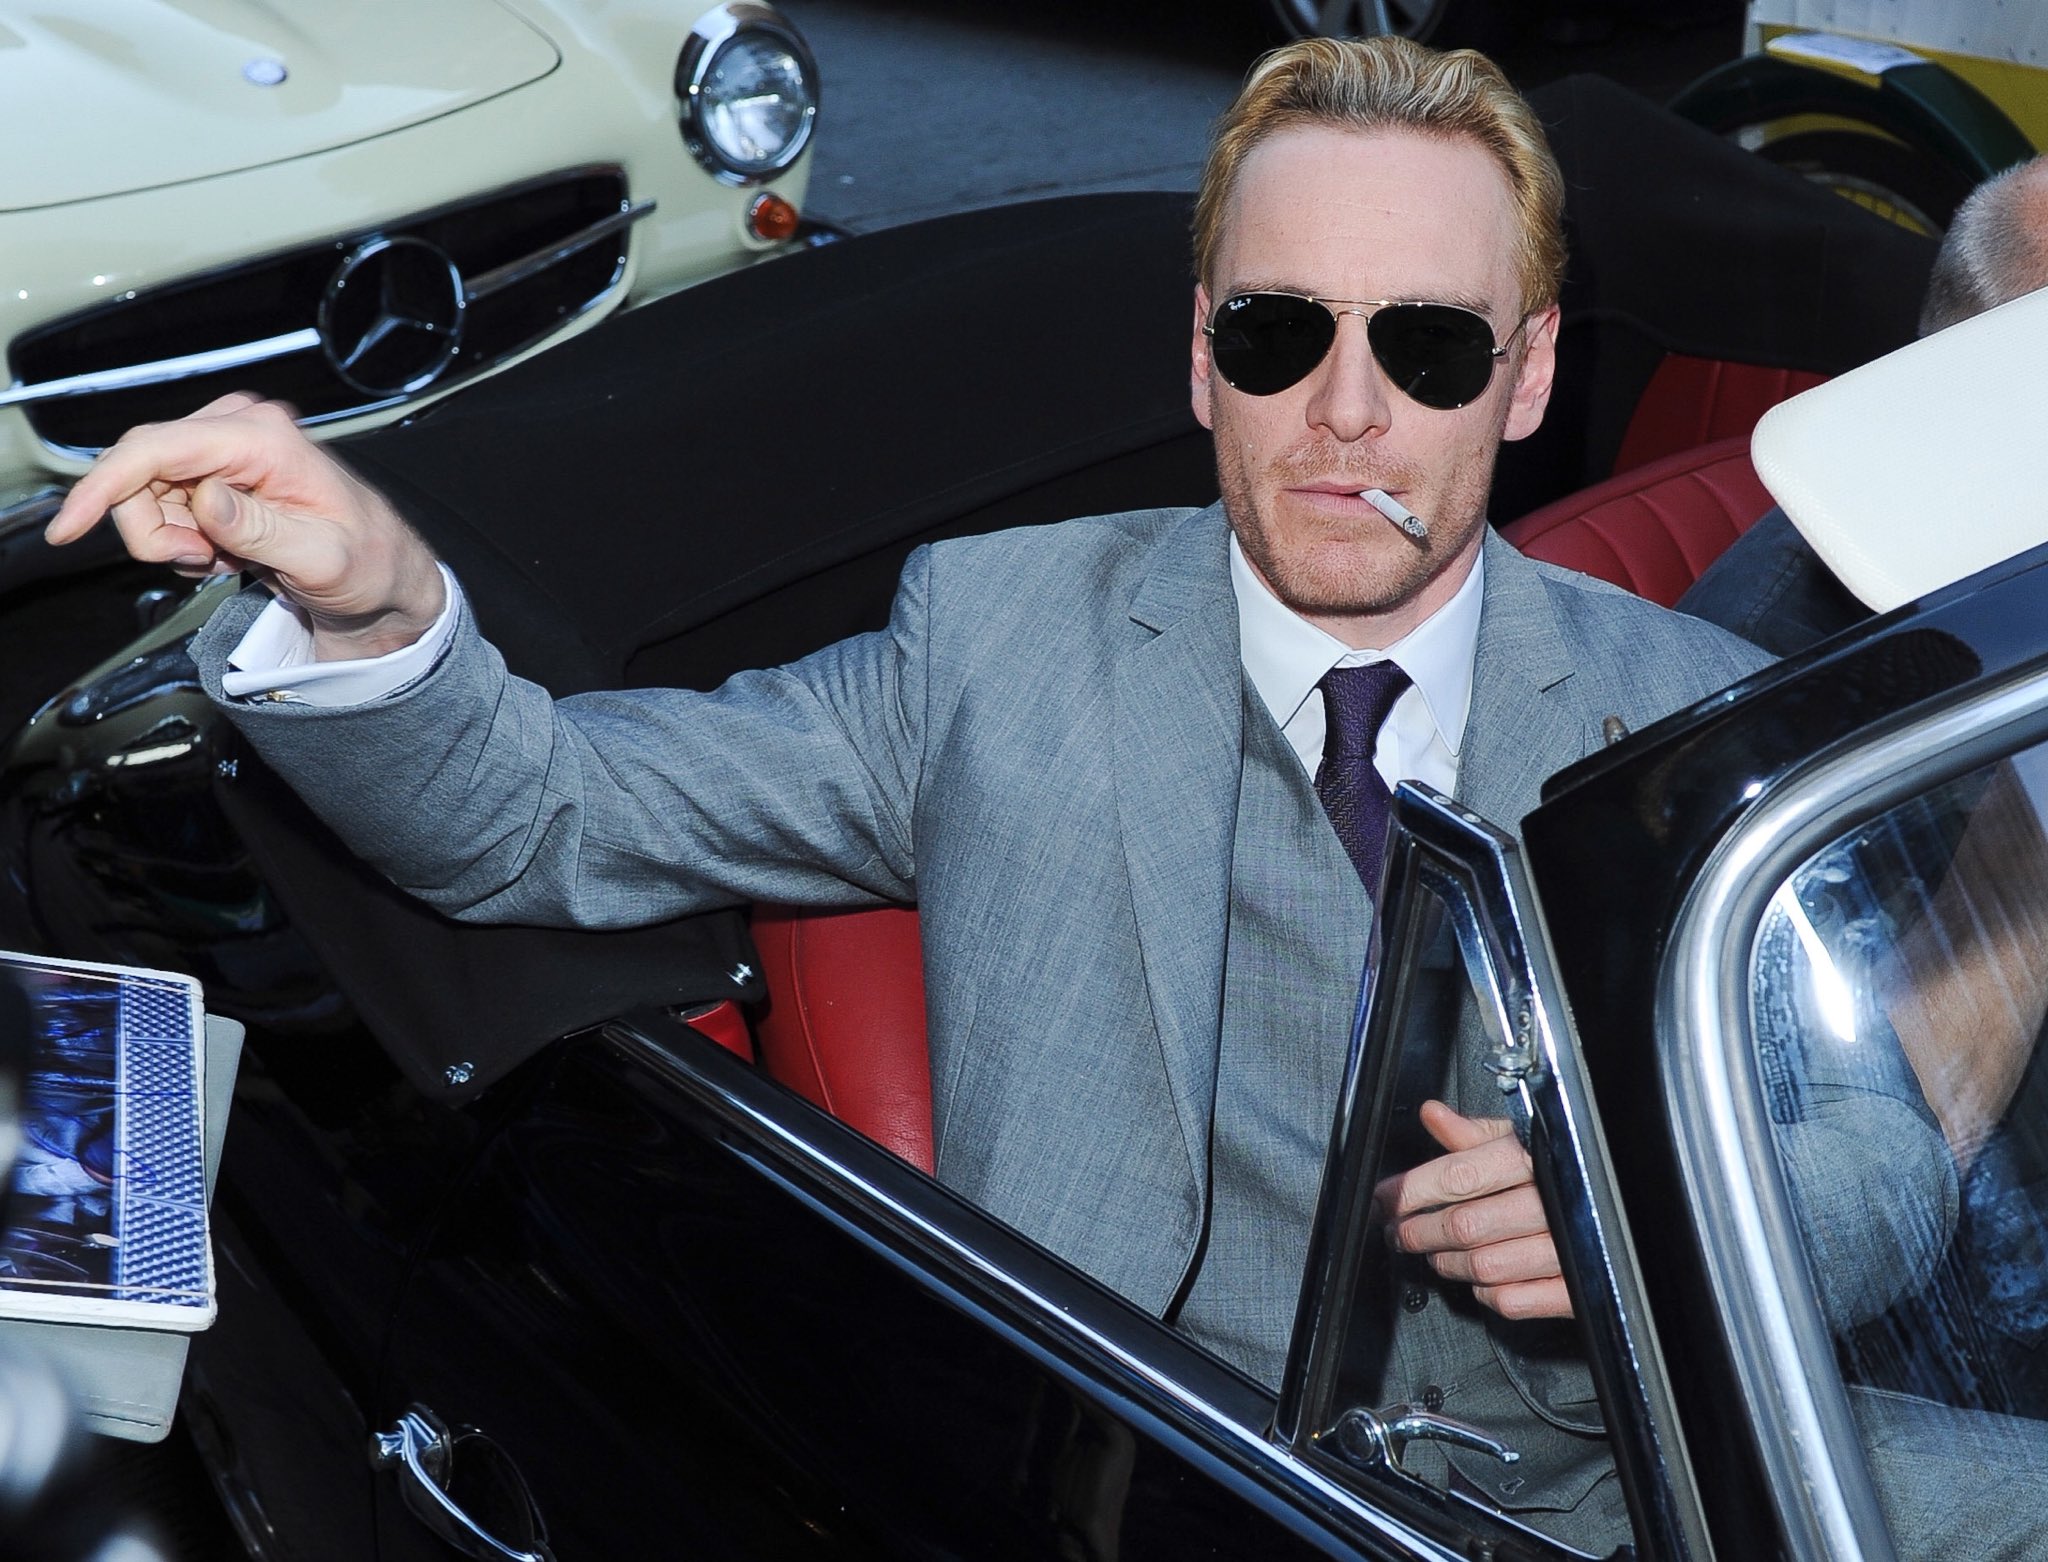 Michael Fassbender smoking a cigarette while riding a vintage car on his way to the premiere of ‘X-Men: First Class.’